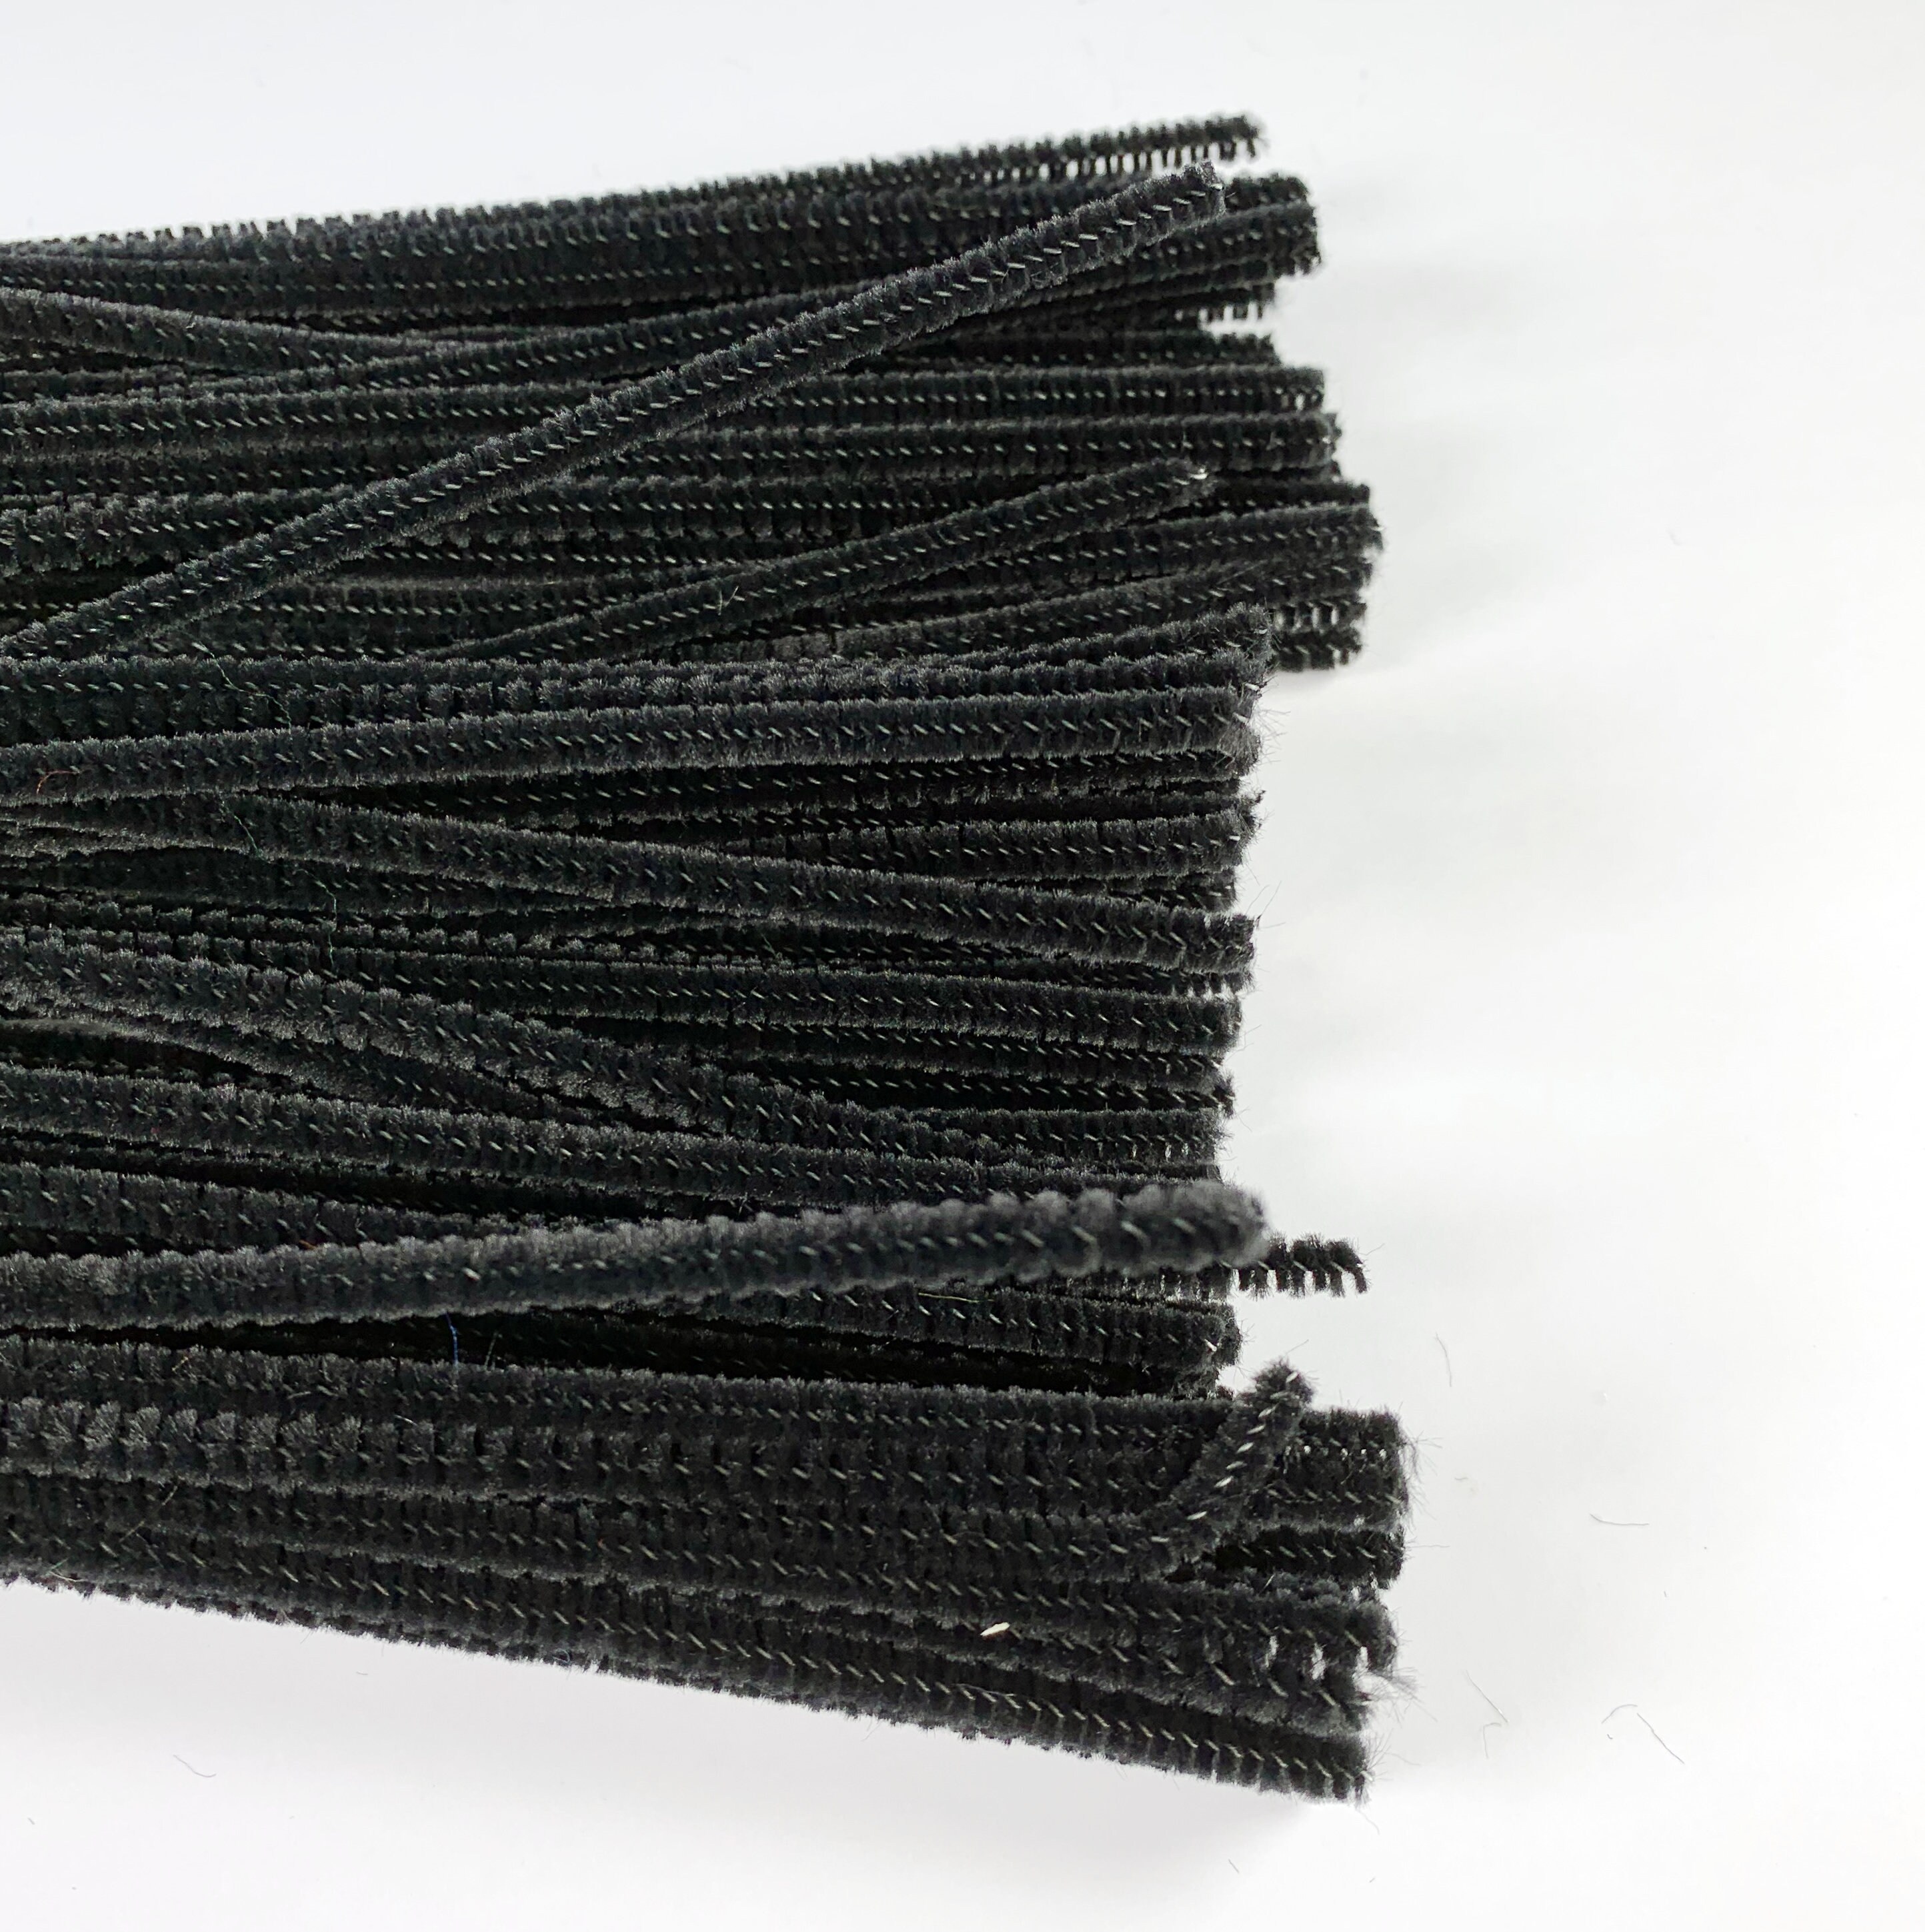 Black Chenille Craft Stems 25 Pieces, 3 Mm Skinny Pipe Cleaners, Supplies  for DIY Projects or Kids Crafts 